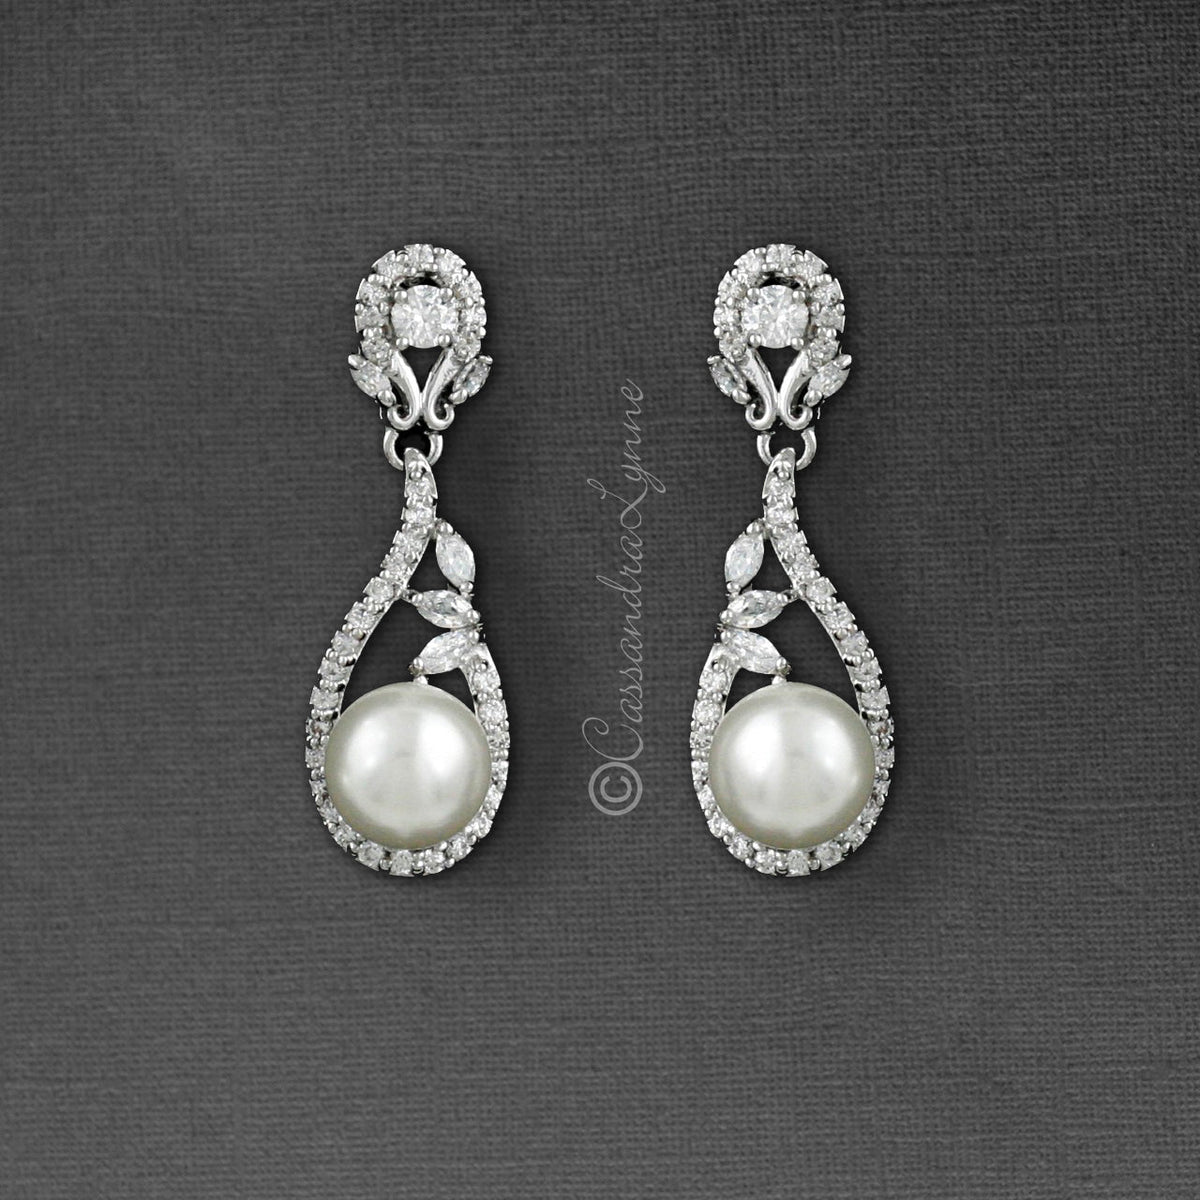 CZ Drop Earrings with Pearls for the Bride